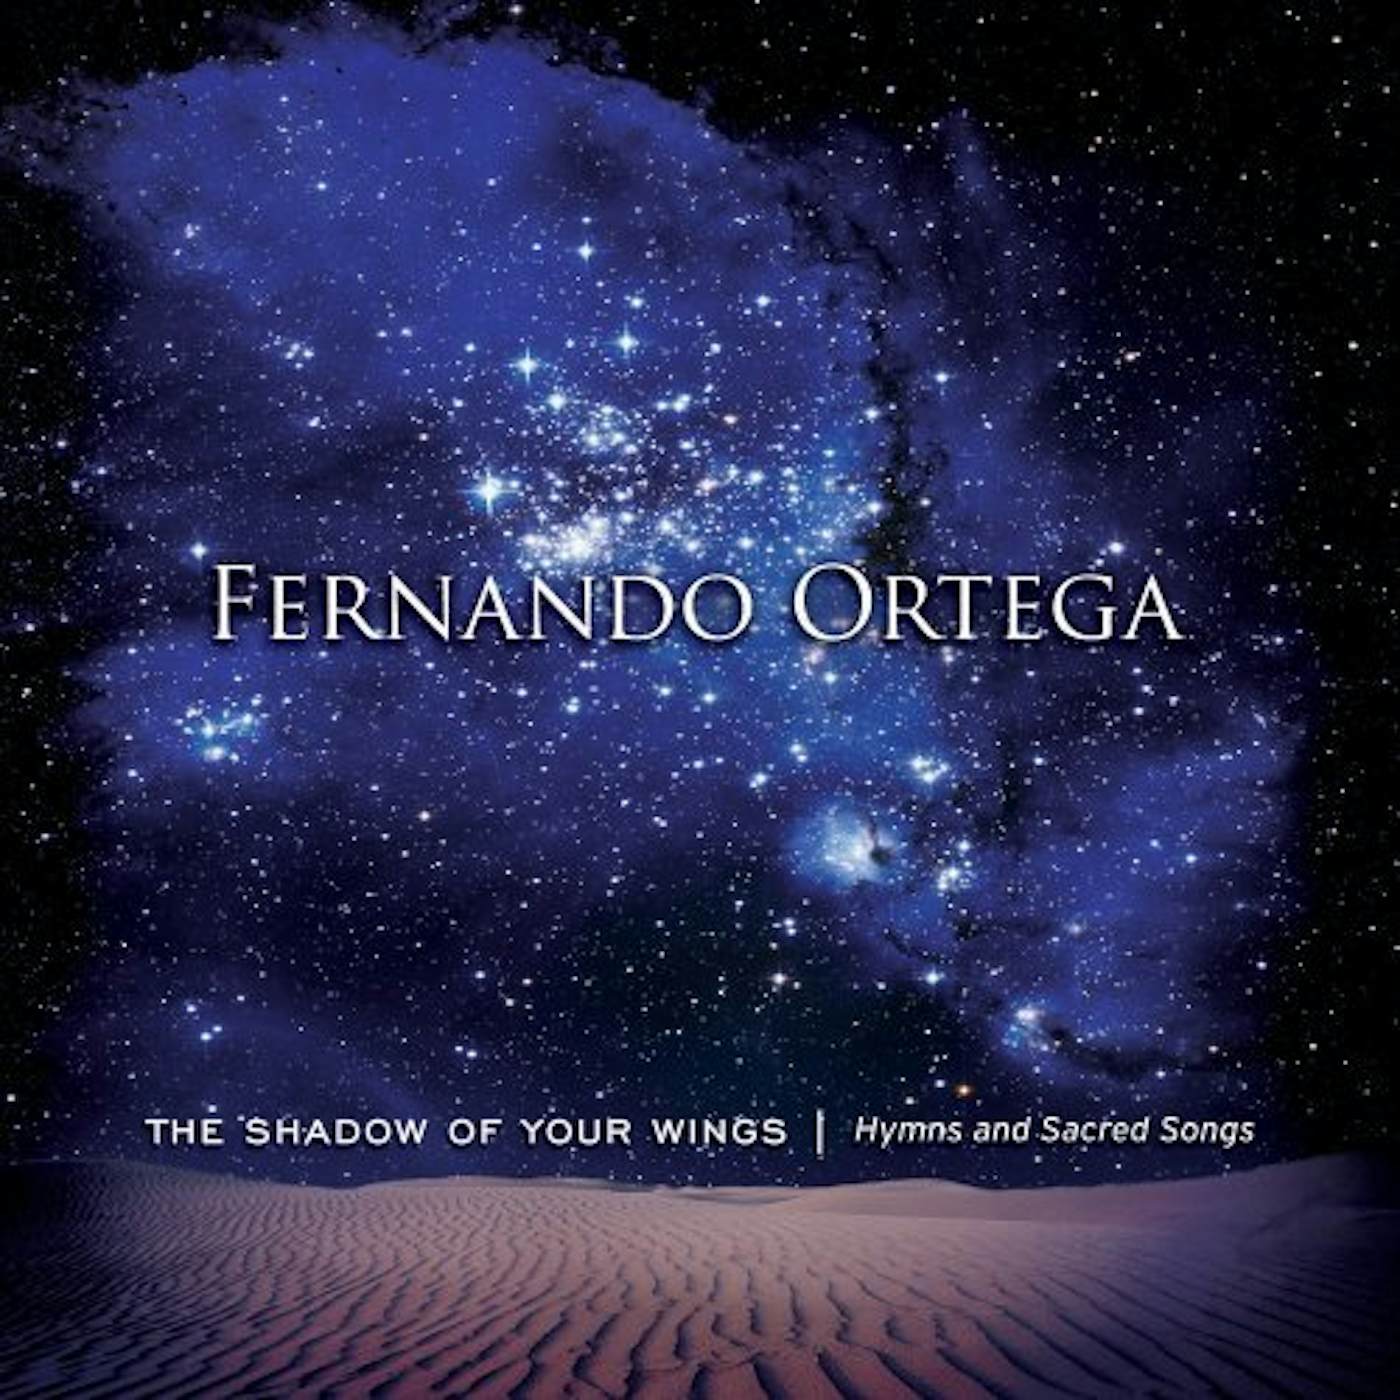 Fernando Ortega SHADOW OF YOUR WINGS: HYMNS AND SACRED SONGS CD